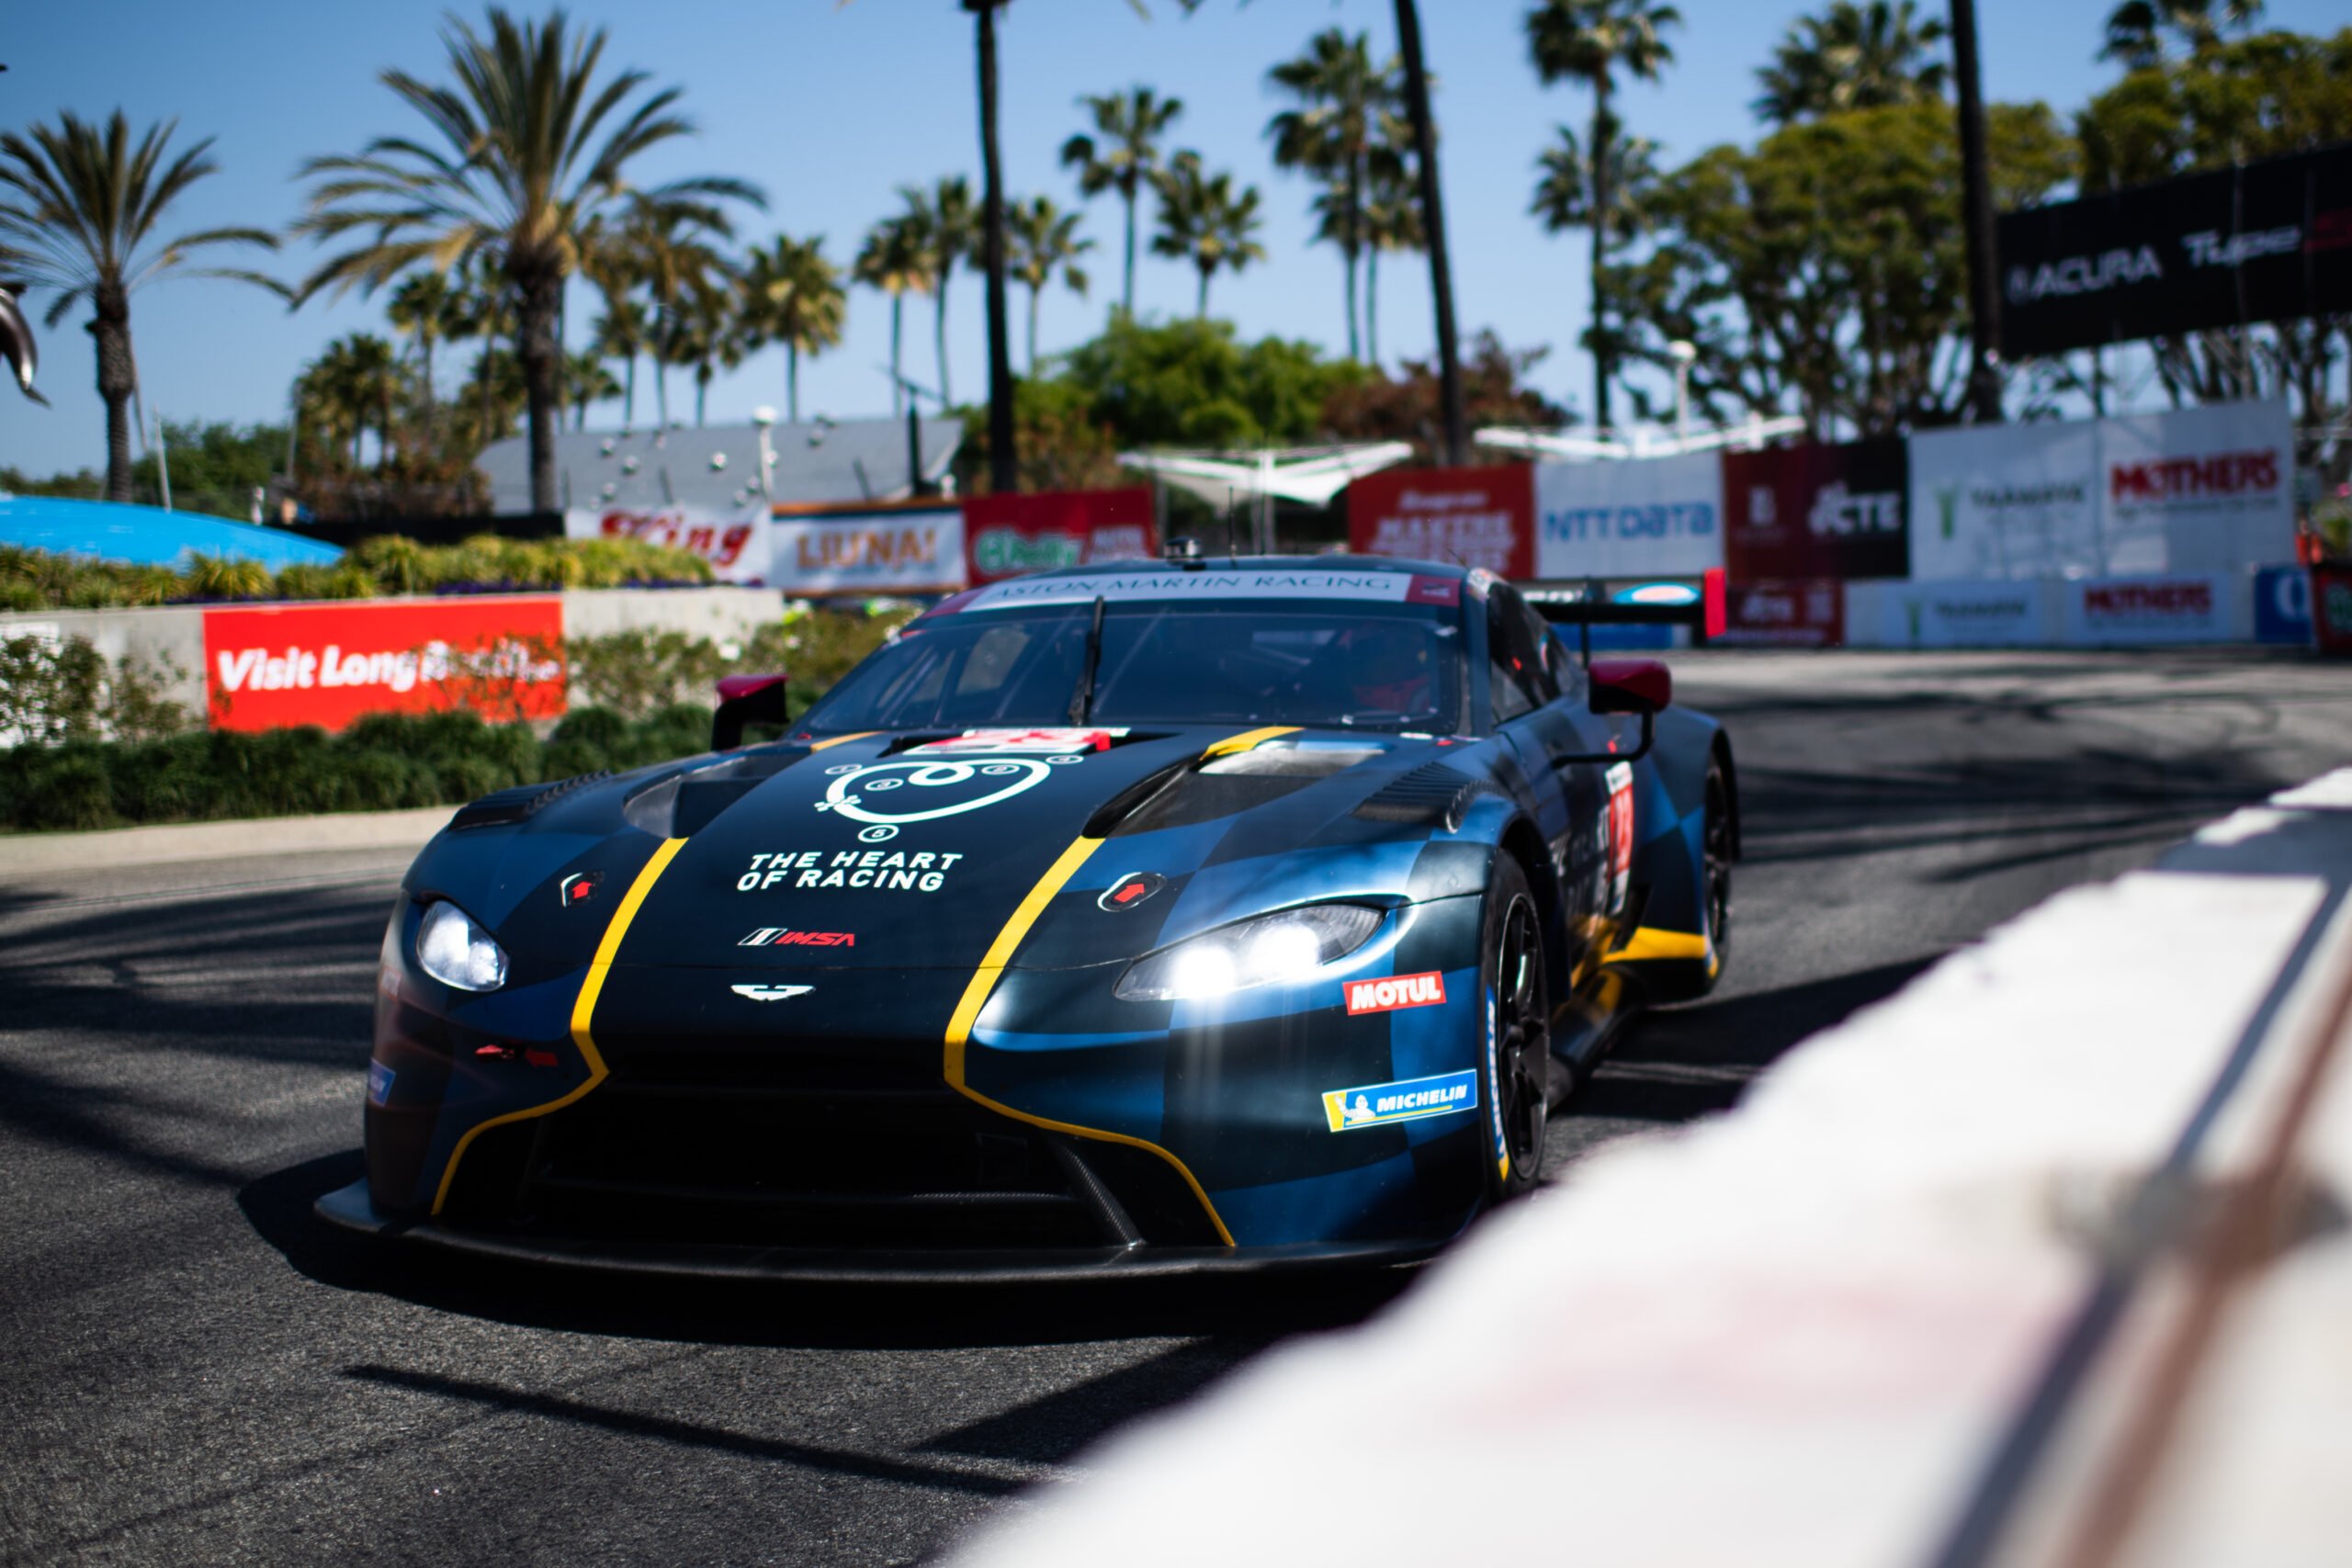 Aston Martin and Heart of Racing put Vantage on the podium at Grand Prix of Long Beach